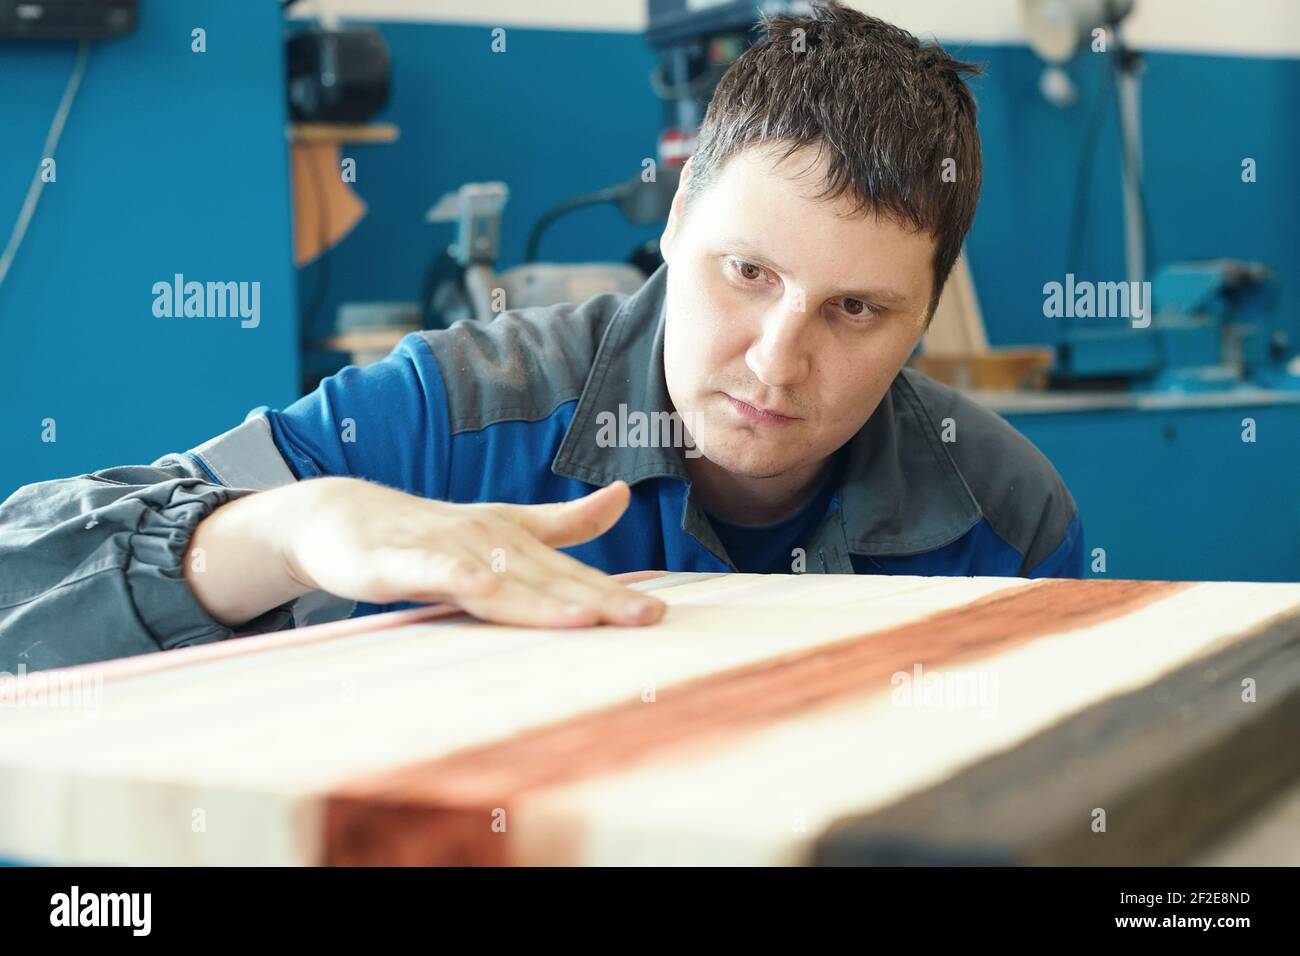 A cabinetmaker works with wood in a carpentry shop. A young worker of Caucasian appearance makes a countertop. Stock Photo